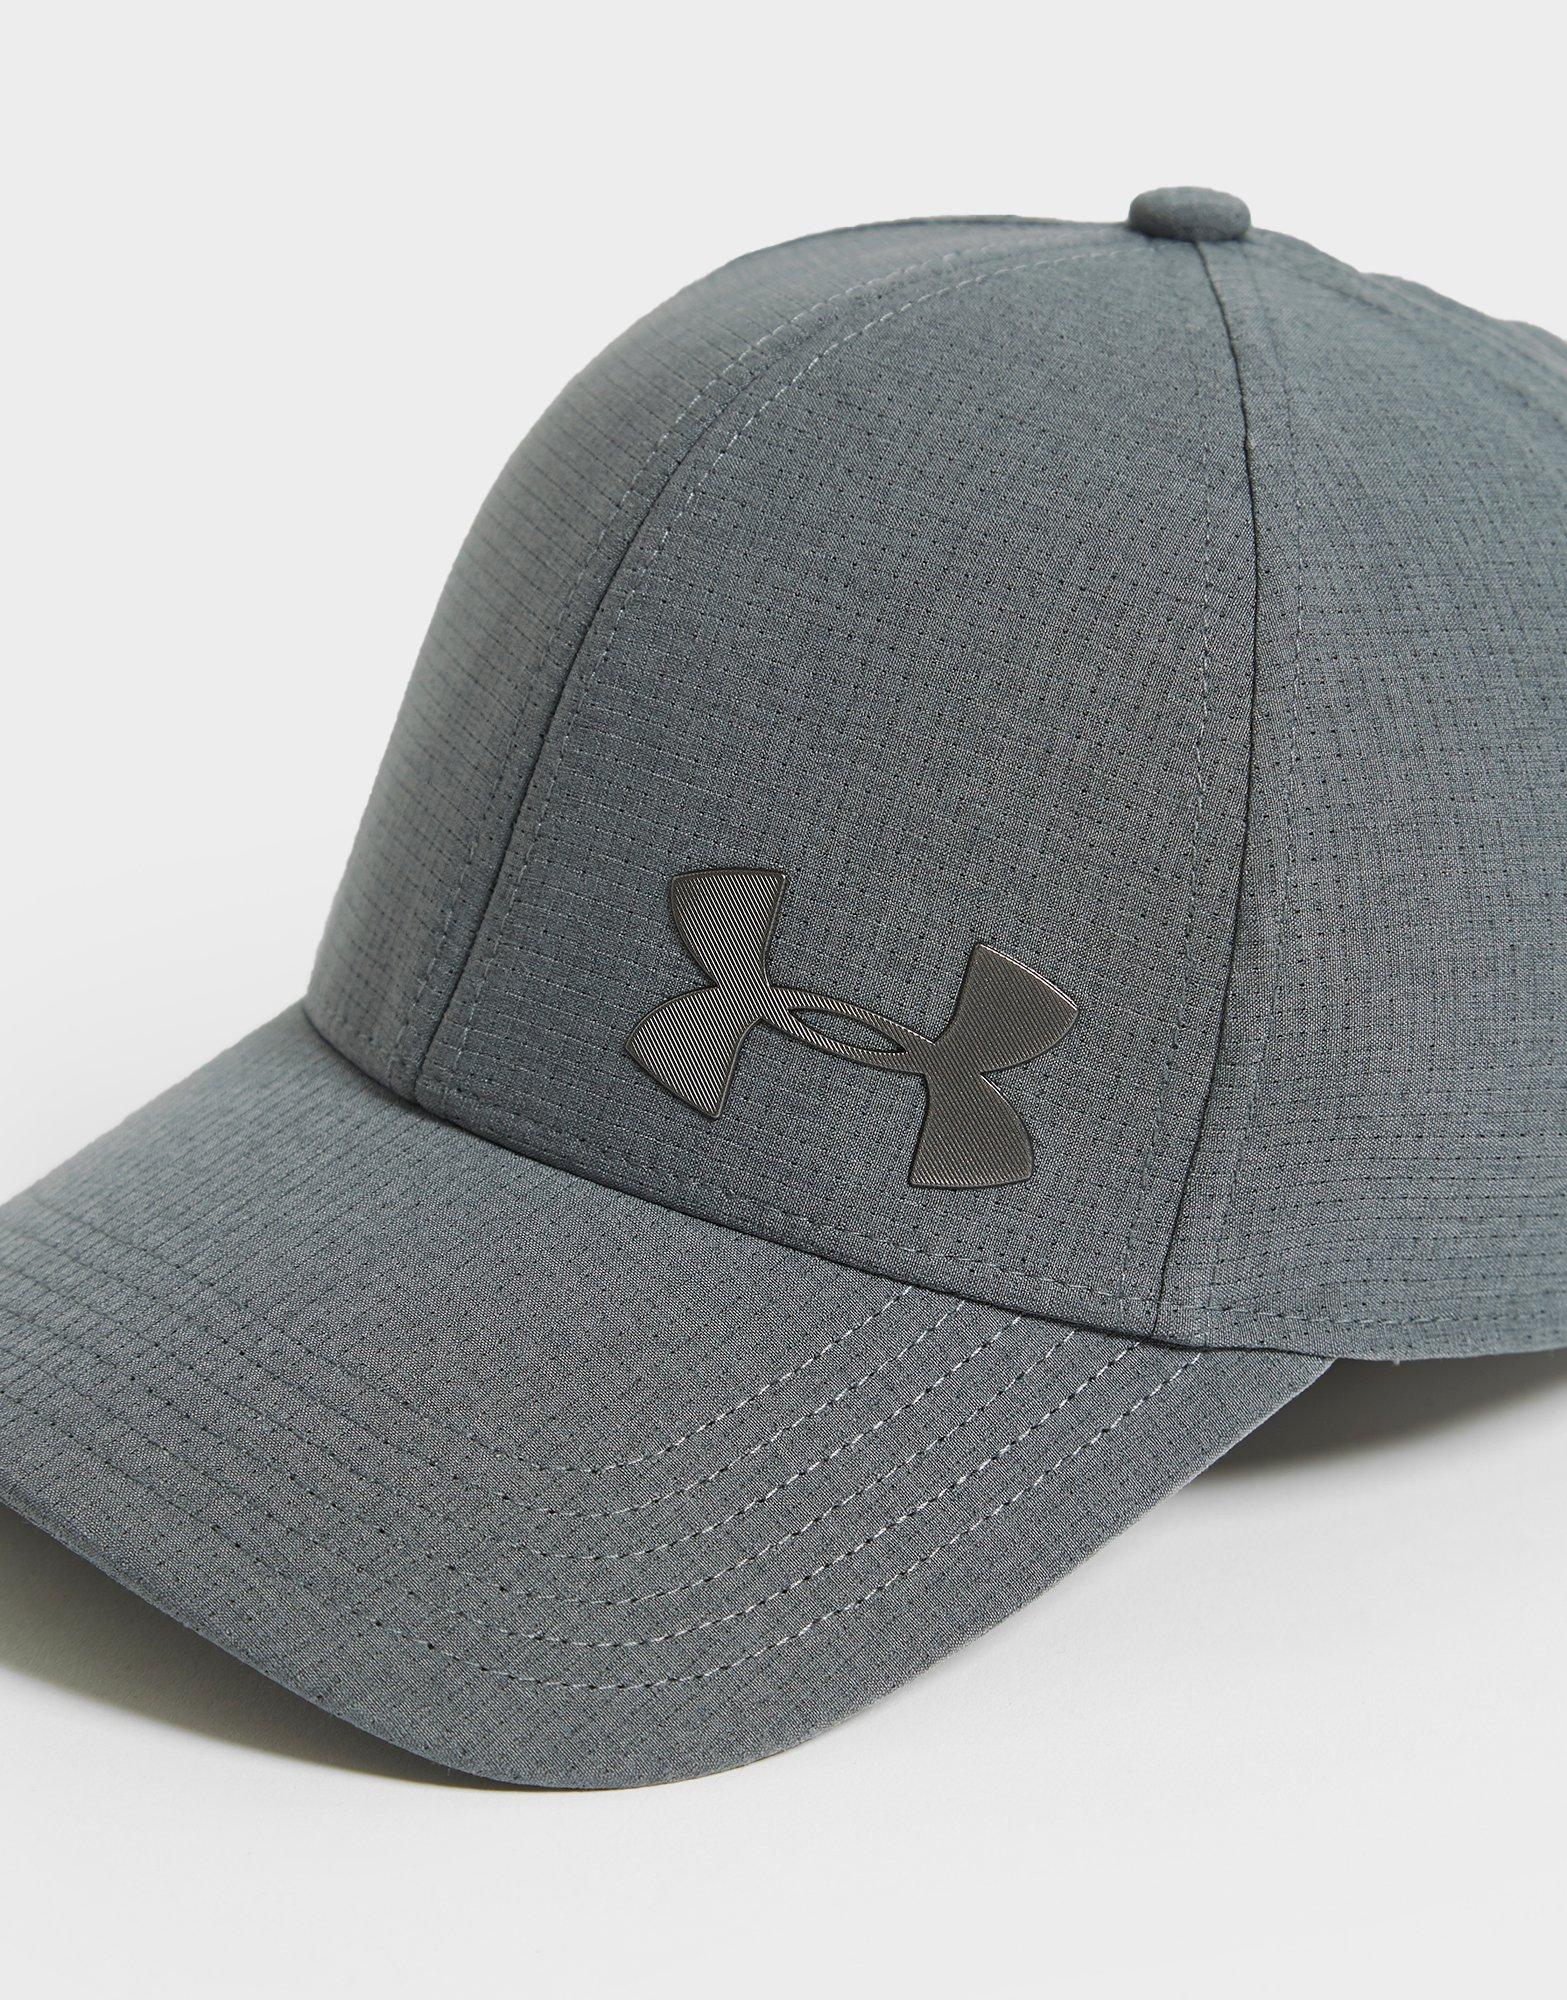 Buy Under Armour Air Vent Cap | JD Sports